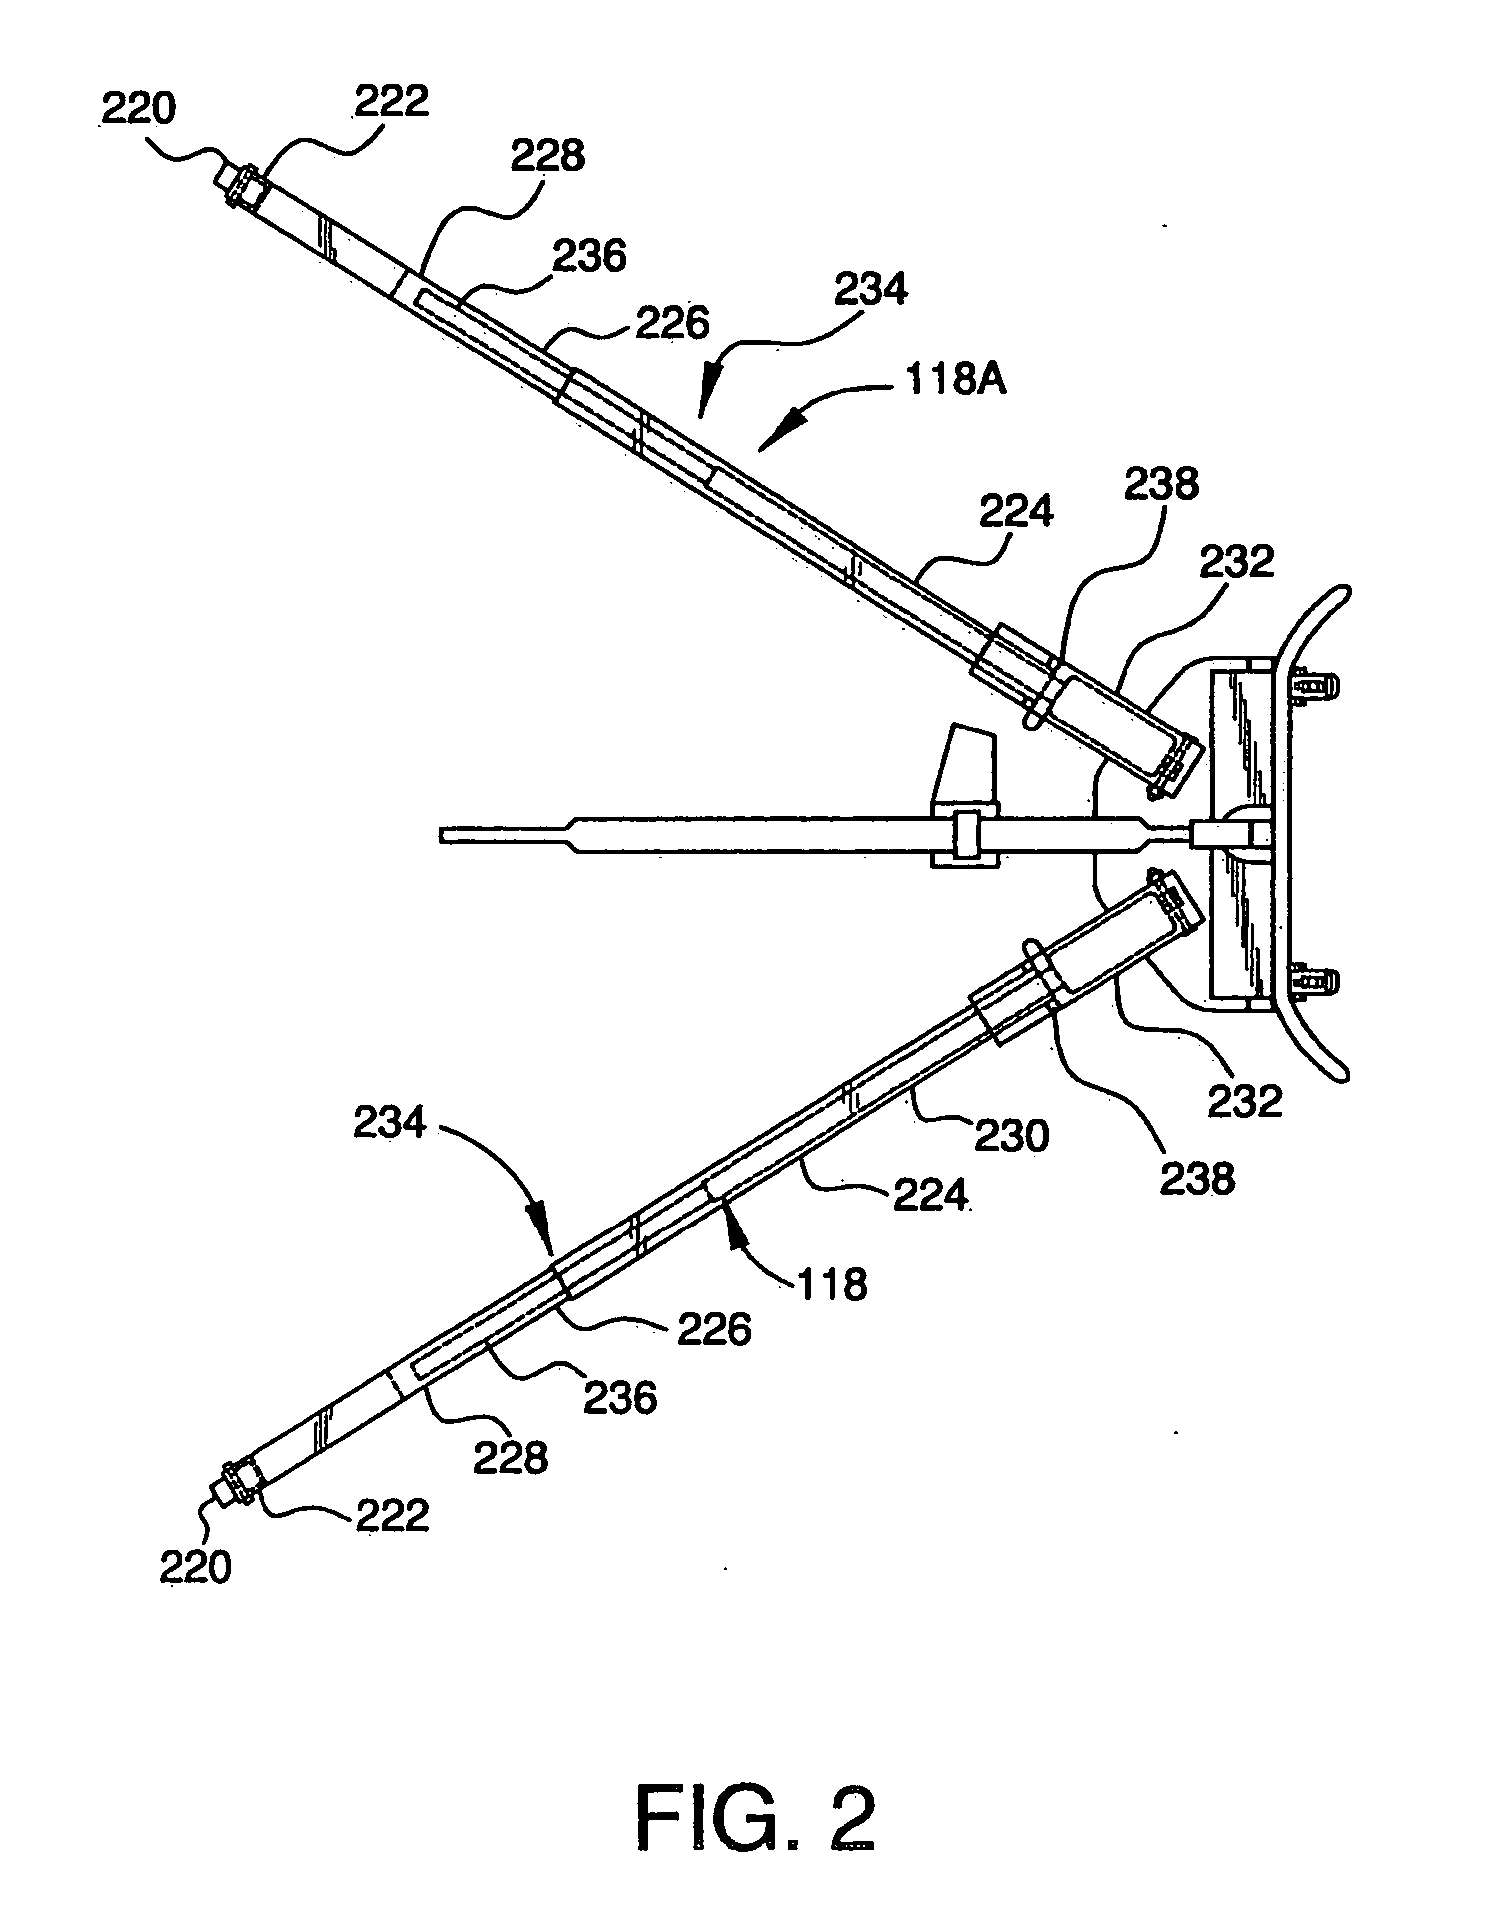 Stretcher supporter for a storable patient lift and transfer device and method for doing the same